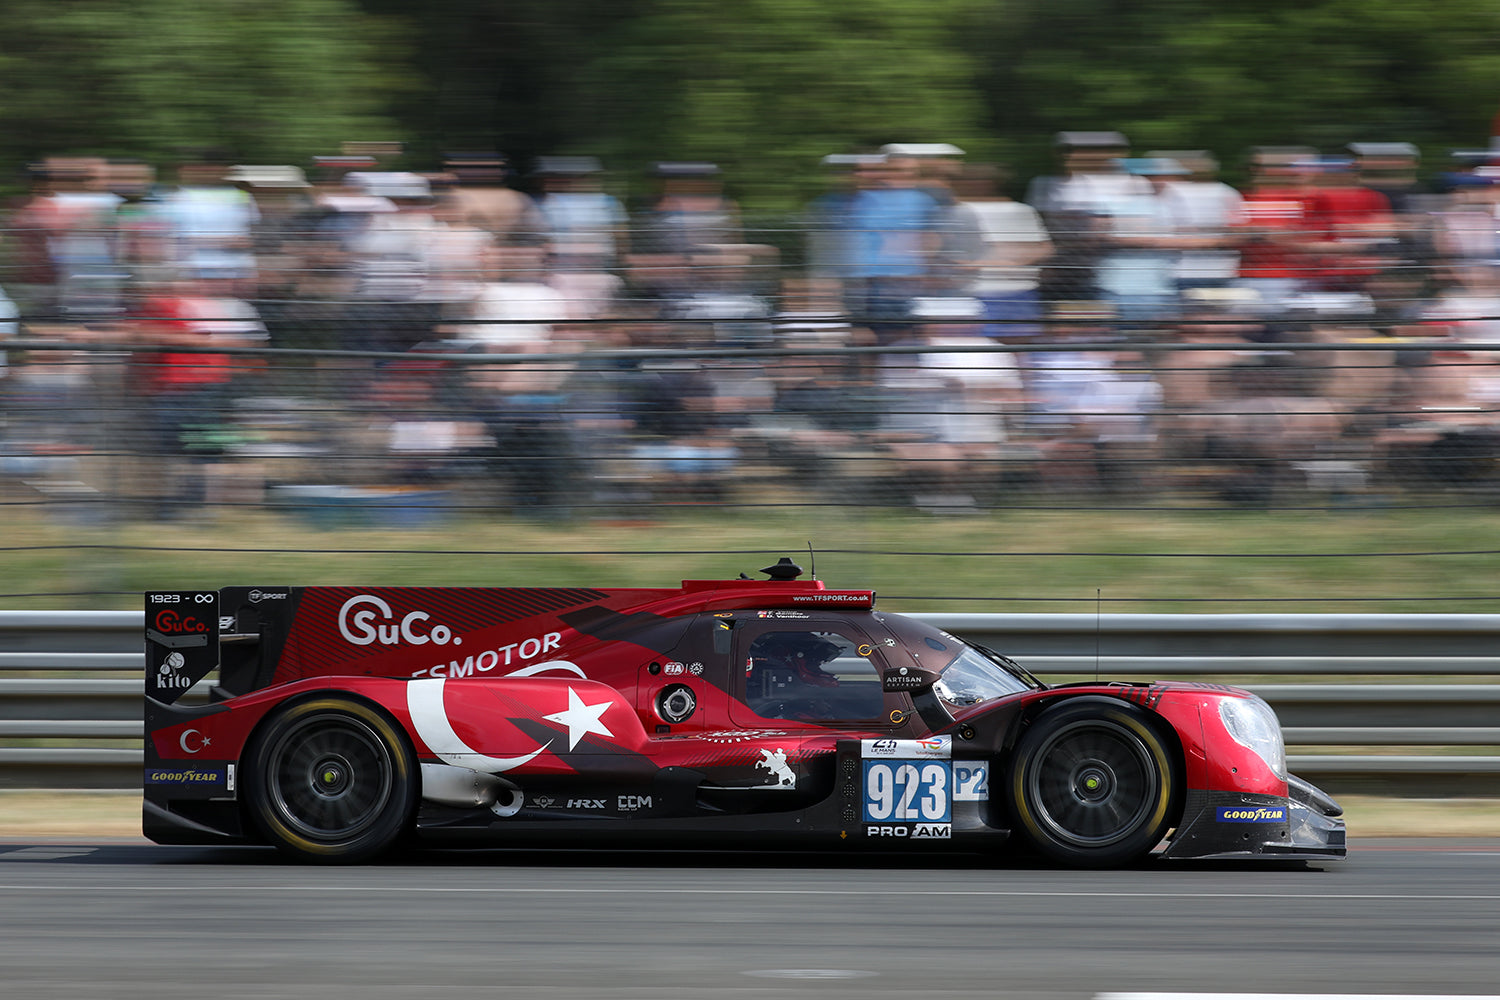 LE MANS 24h / WEC – tagged LM P2 – Racing Models